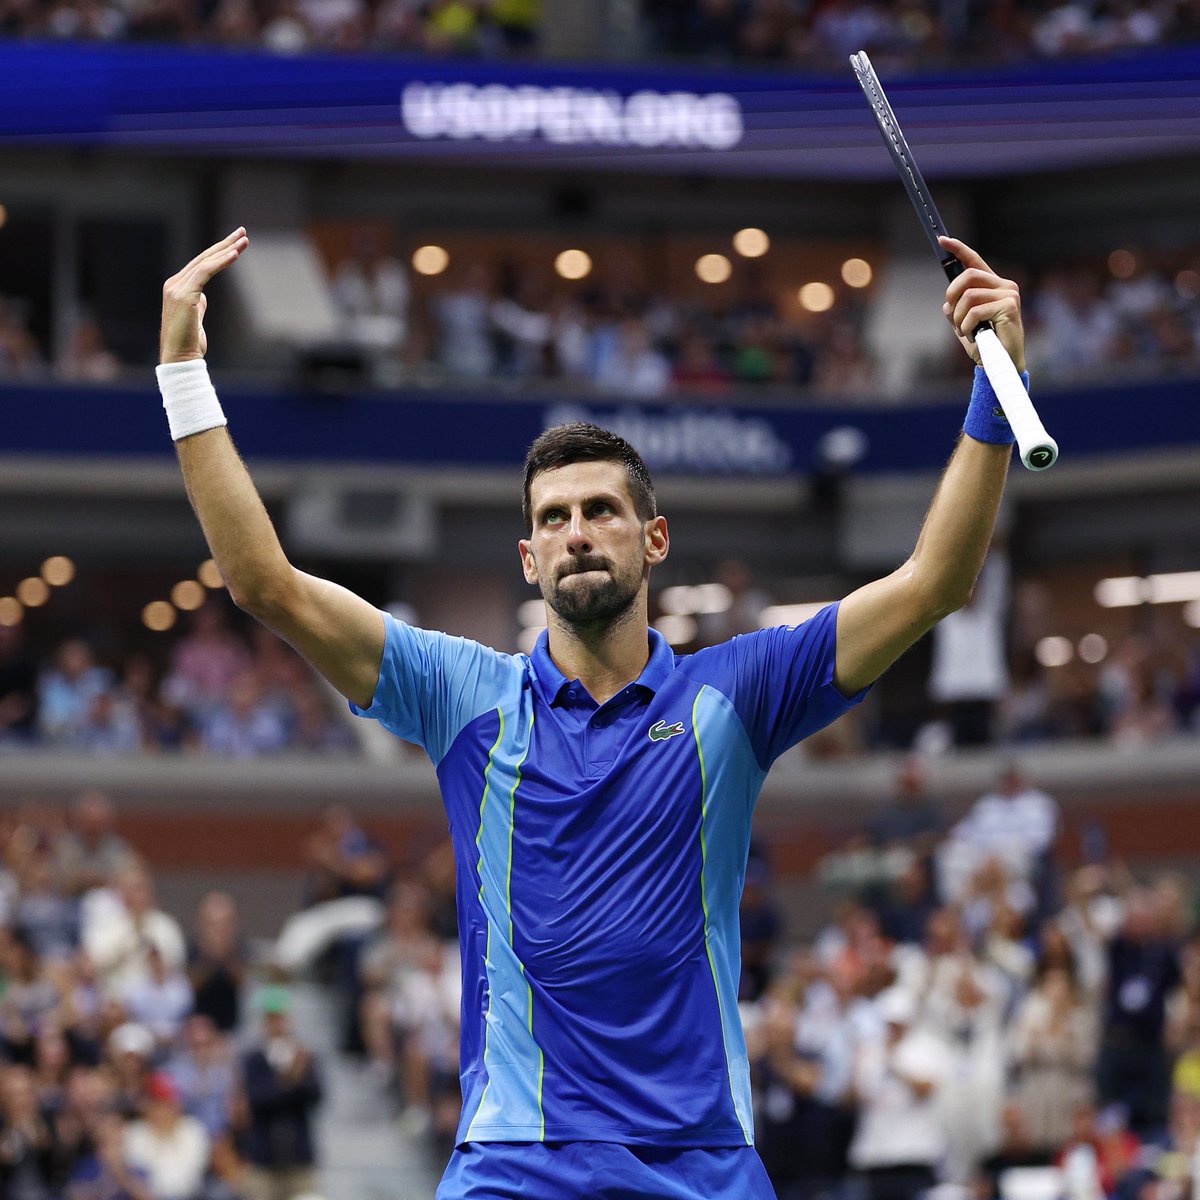 Never Back Down Never What? 👊 Now just one set away as @DjokerNole takes a two set lead 6-3, 7-6(5)! @usopen | #USOpen